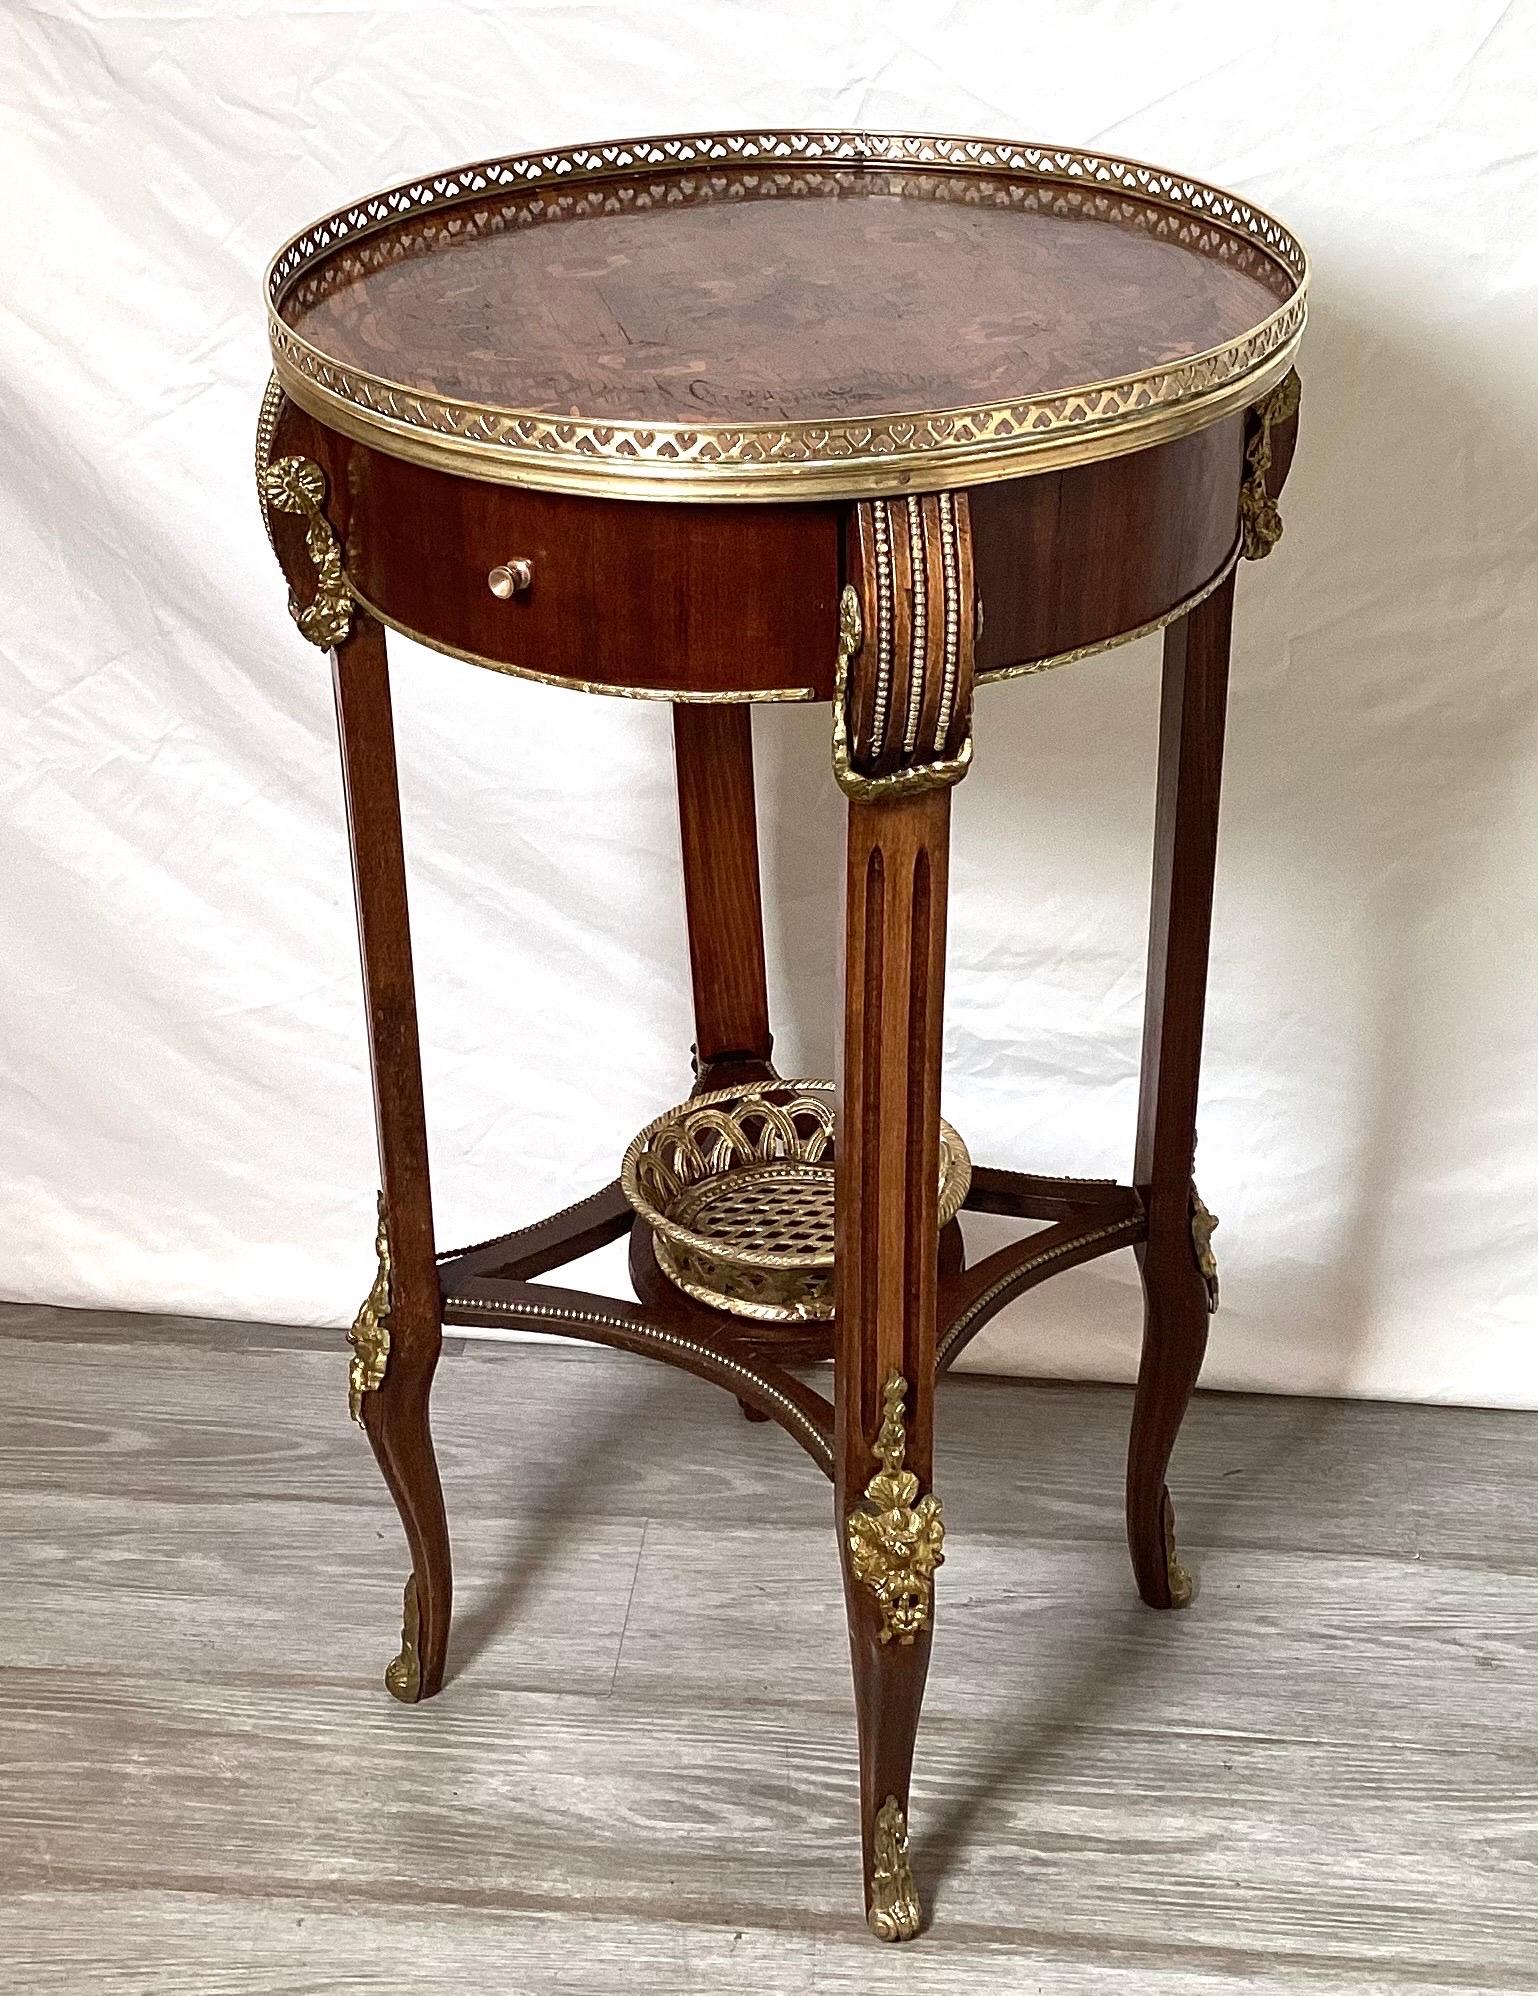 An elegant round accent side table in the Louis XV style. The mahogany and tulipwood inlaid top with pierced gallery edge with shapely legs with attached gilt mounts. The stretcher base with a pierced git bronze basket attached. The table is